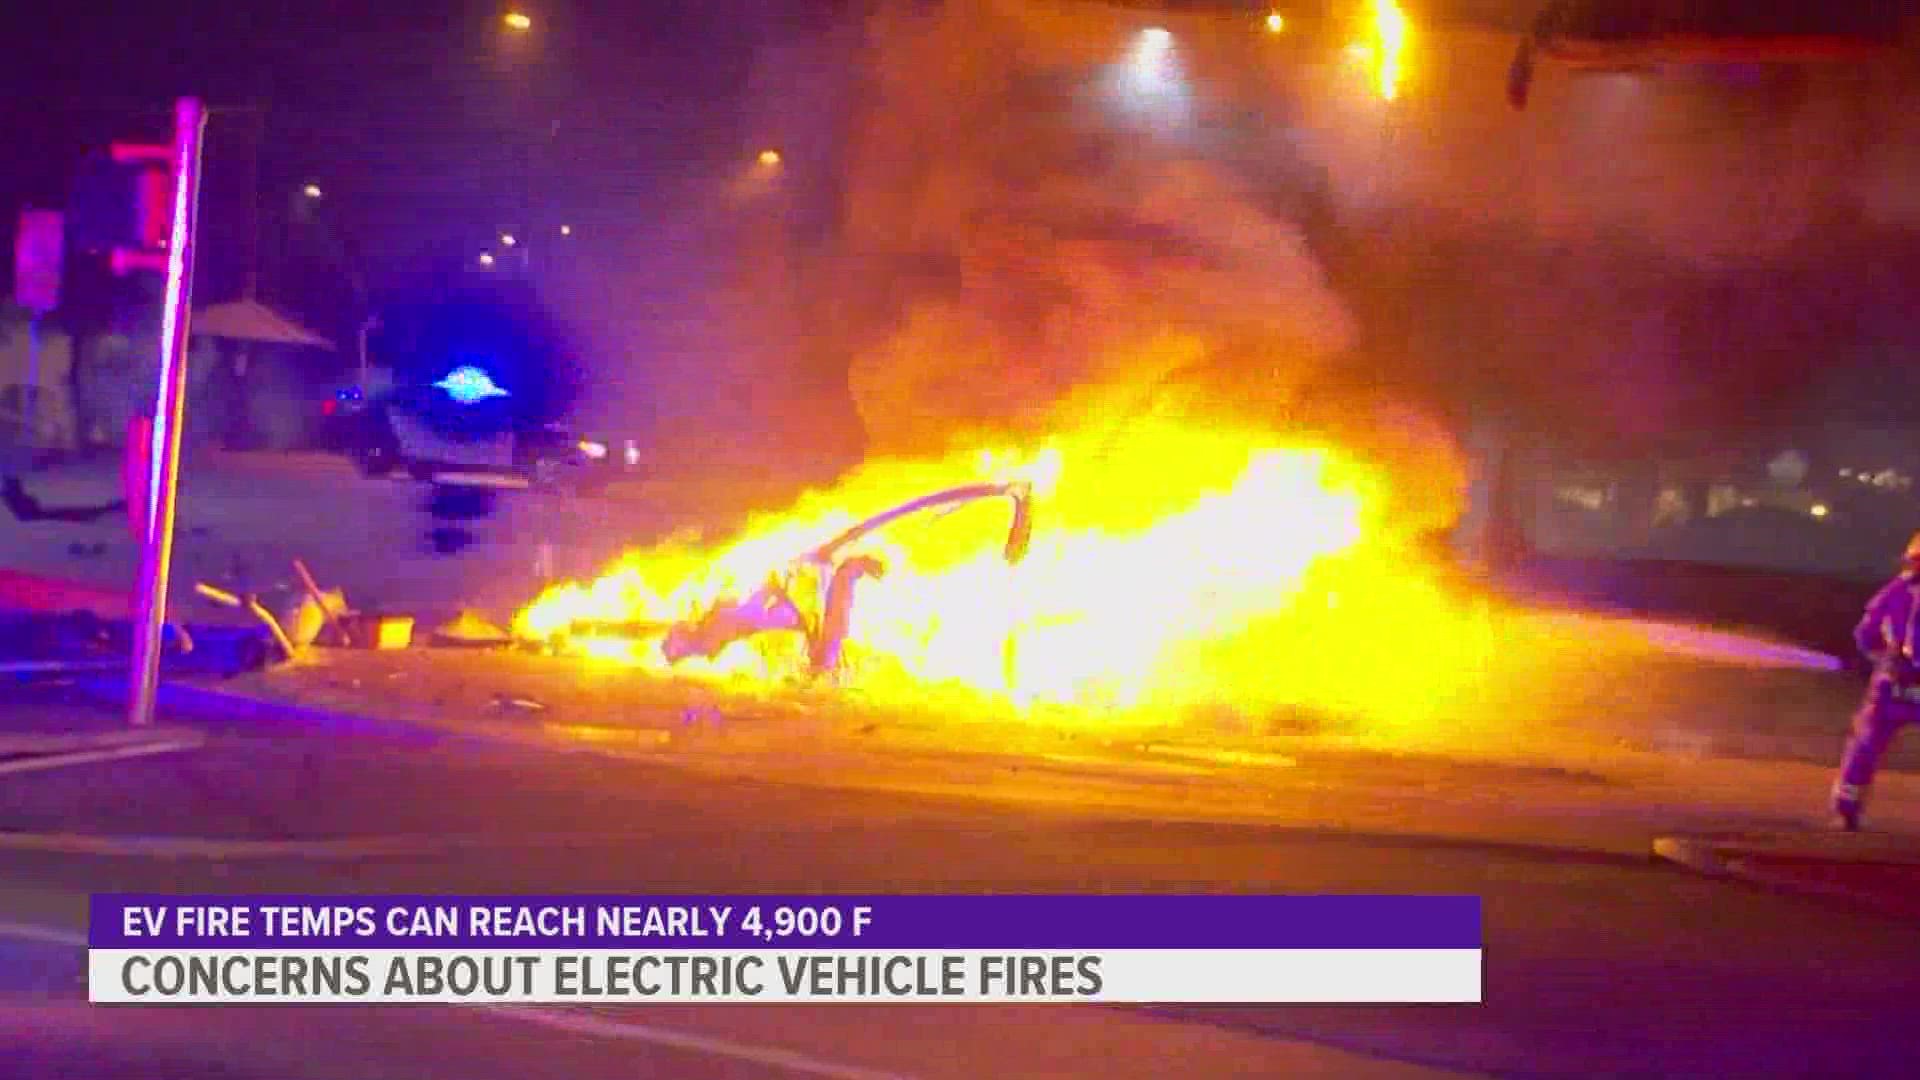 An electric vehicle can burn at temperatures of nearly 4,900 degrees F.